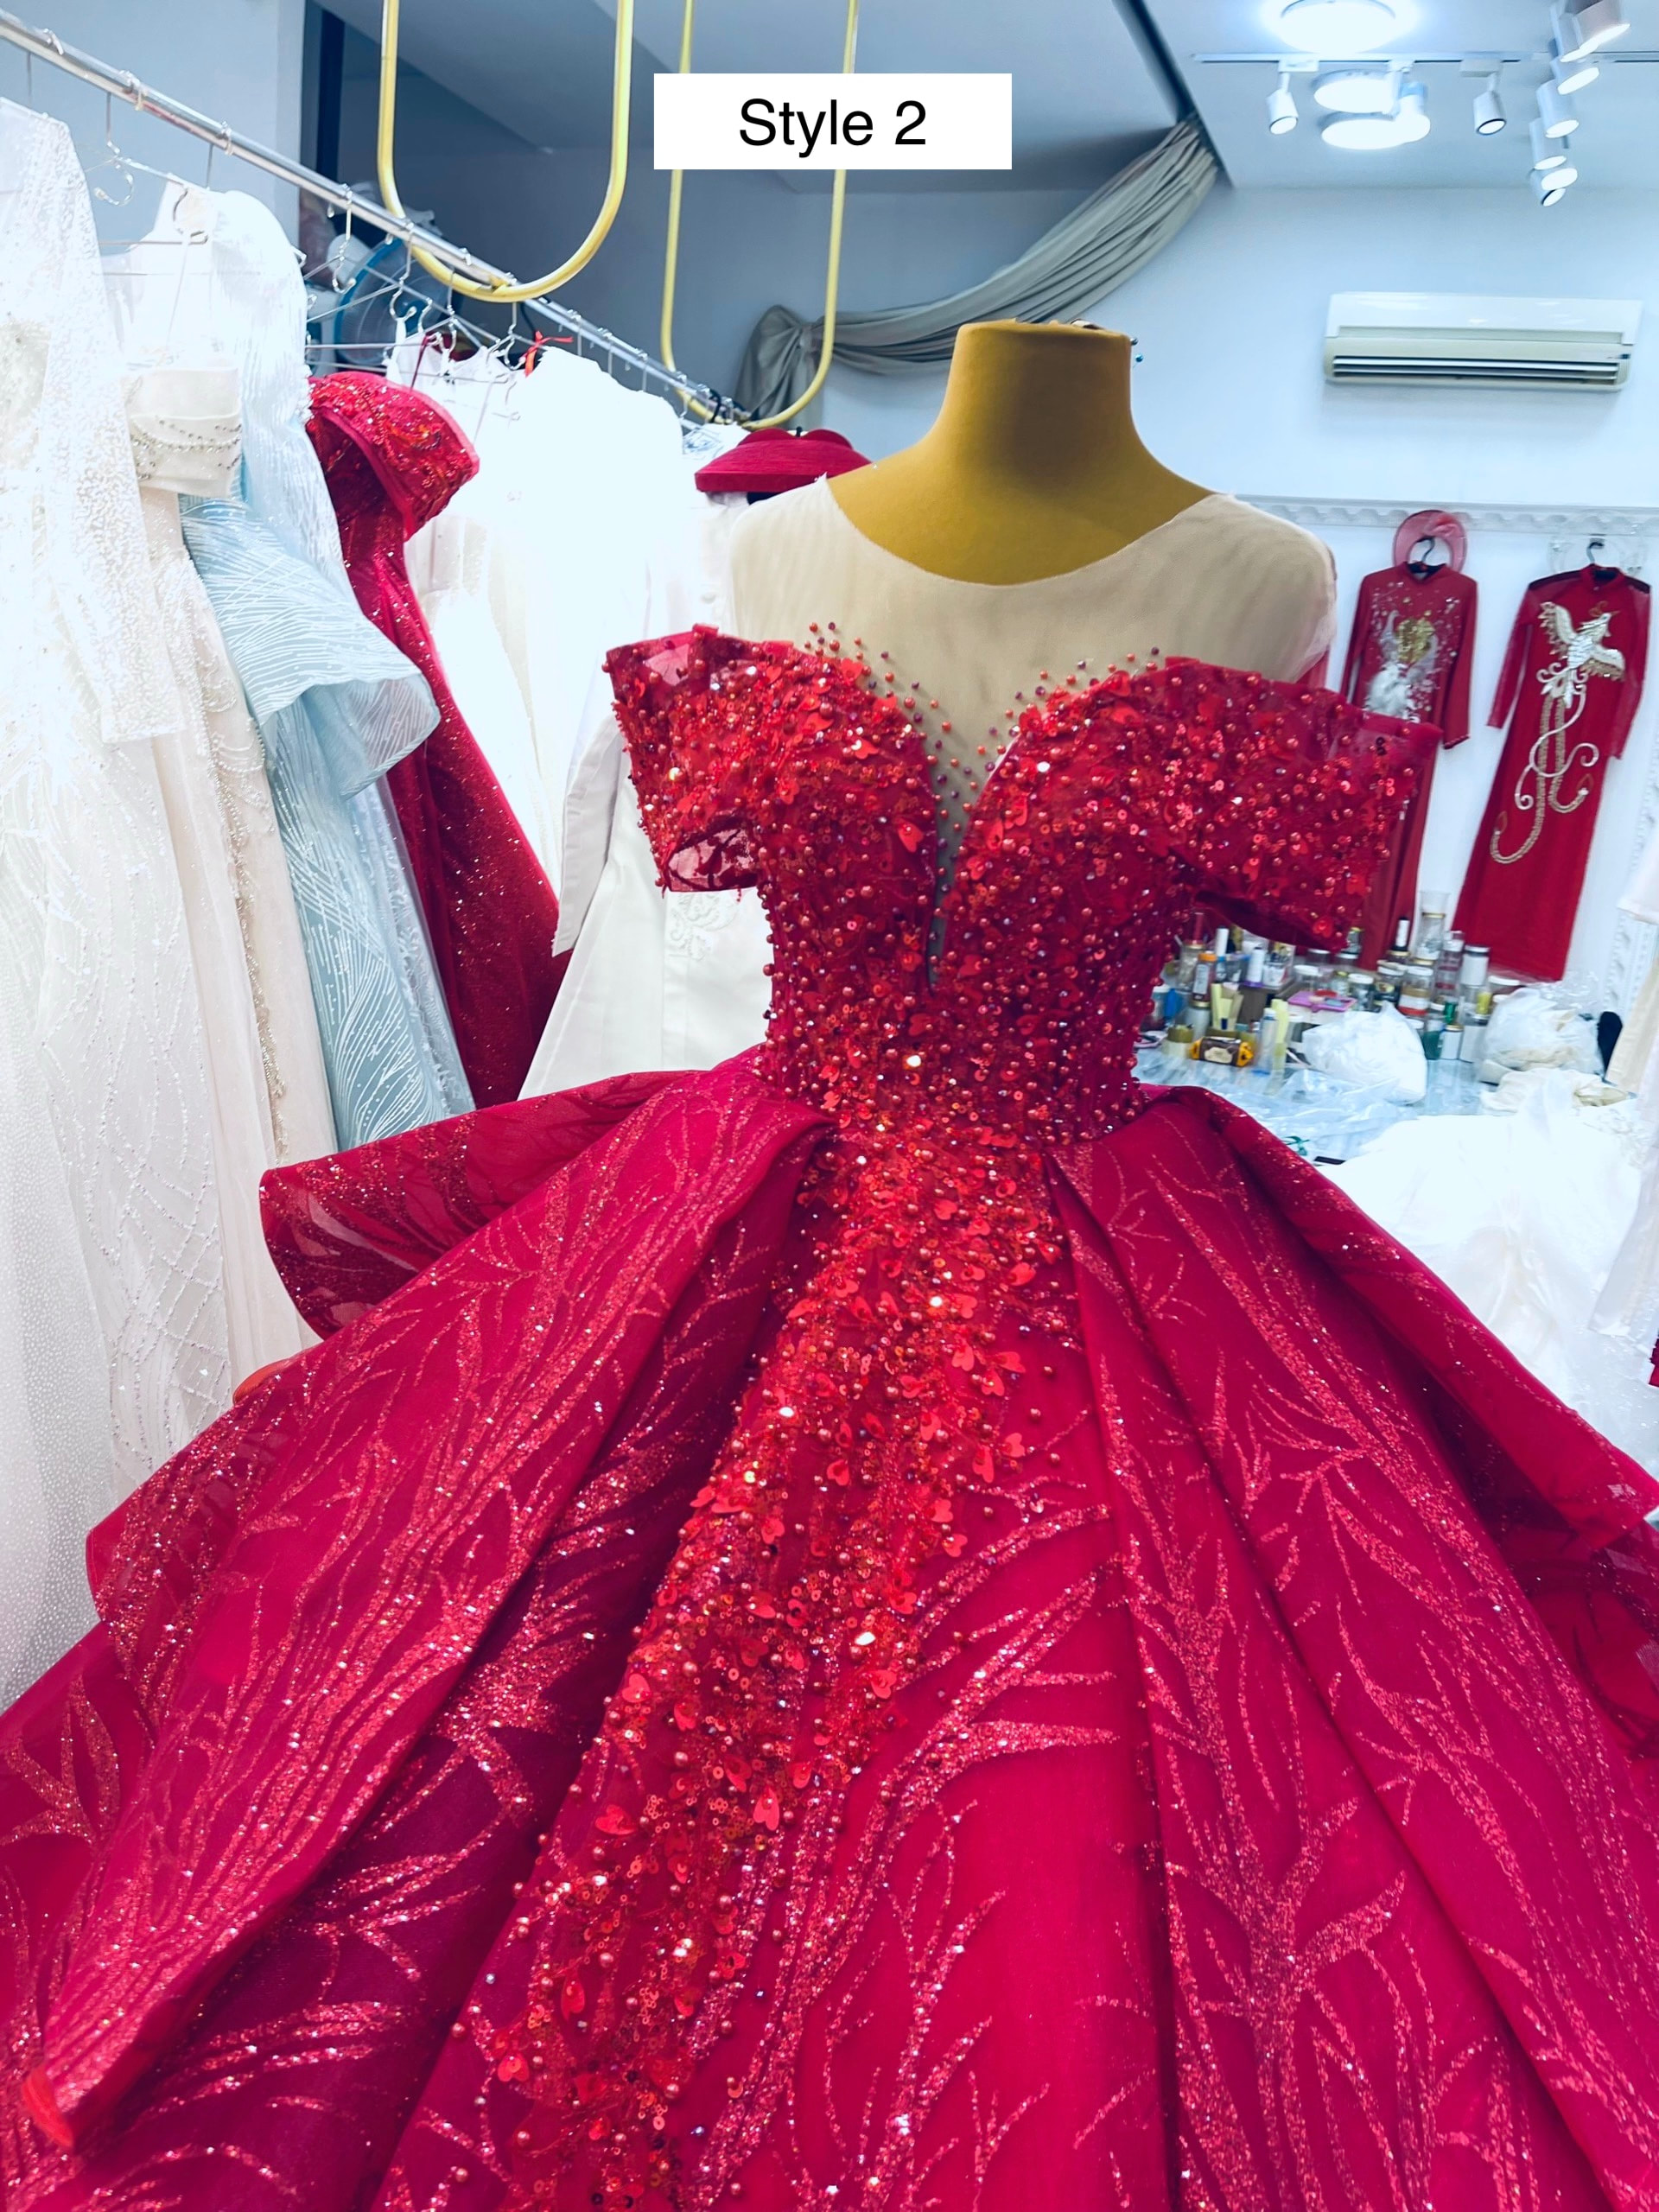 Fiery red - Sparkle ball gown cap sleeves/sleeveless wedding dress with  beaded bodice & glitter tulle